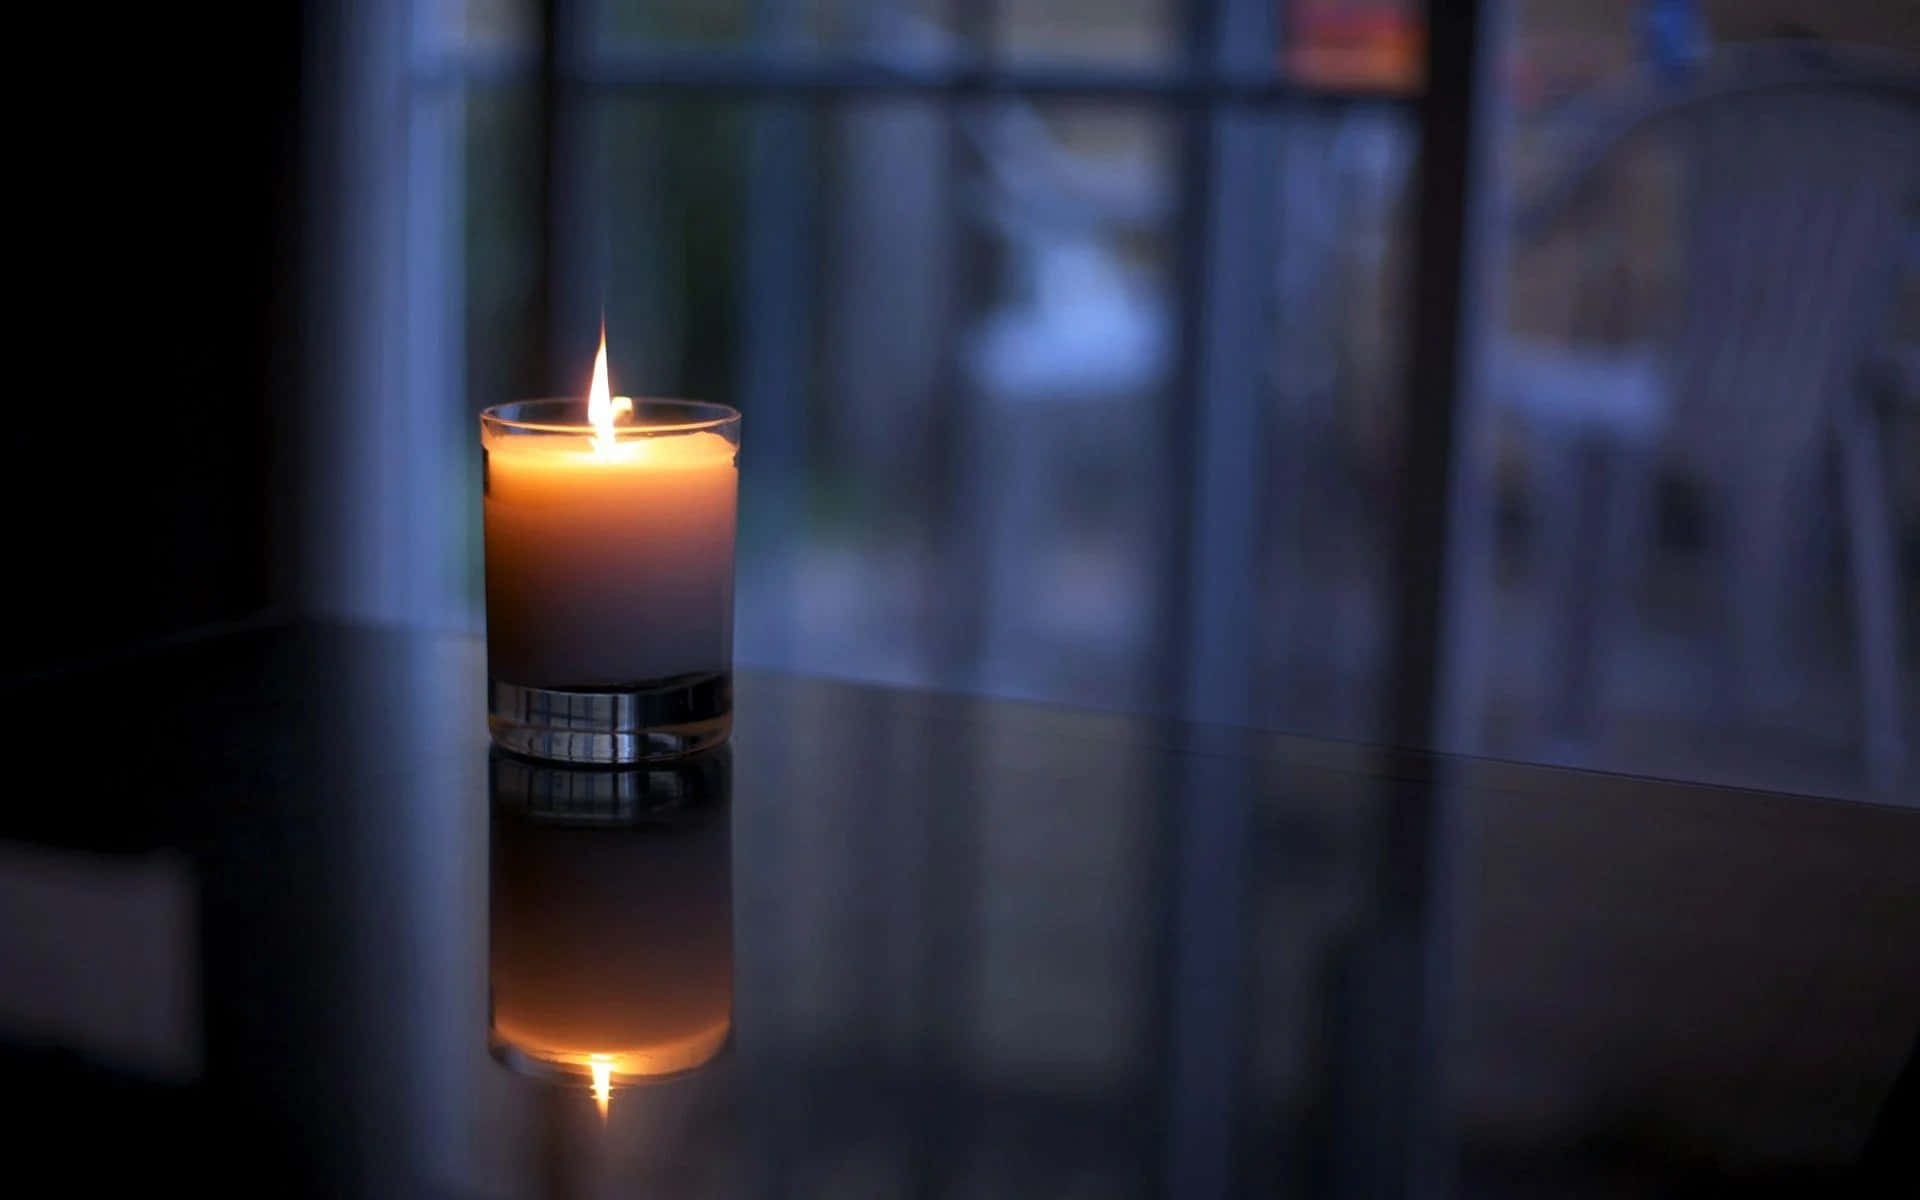 Feel the calming ambiance of a lit candle